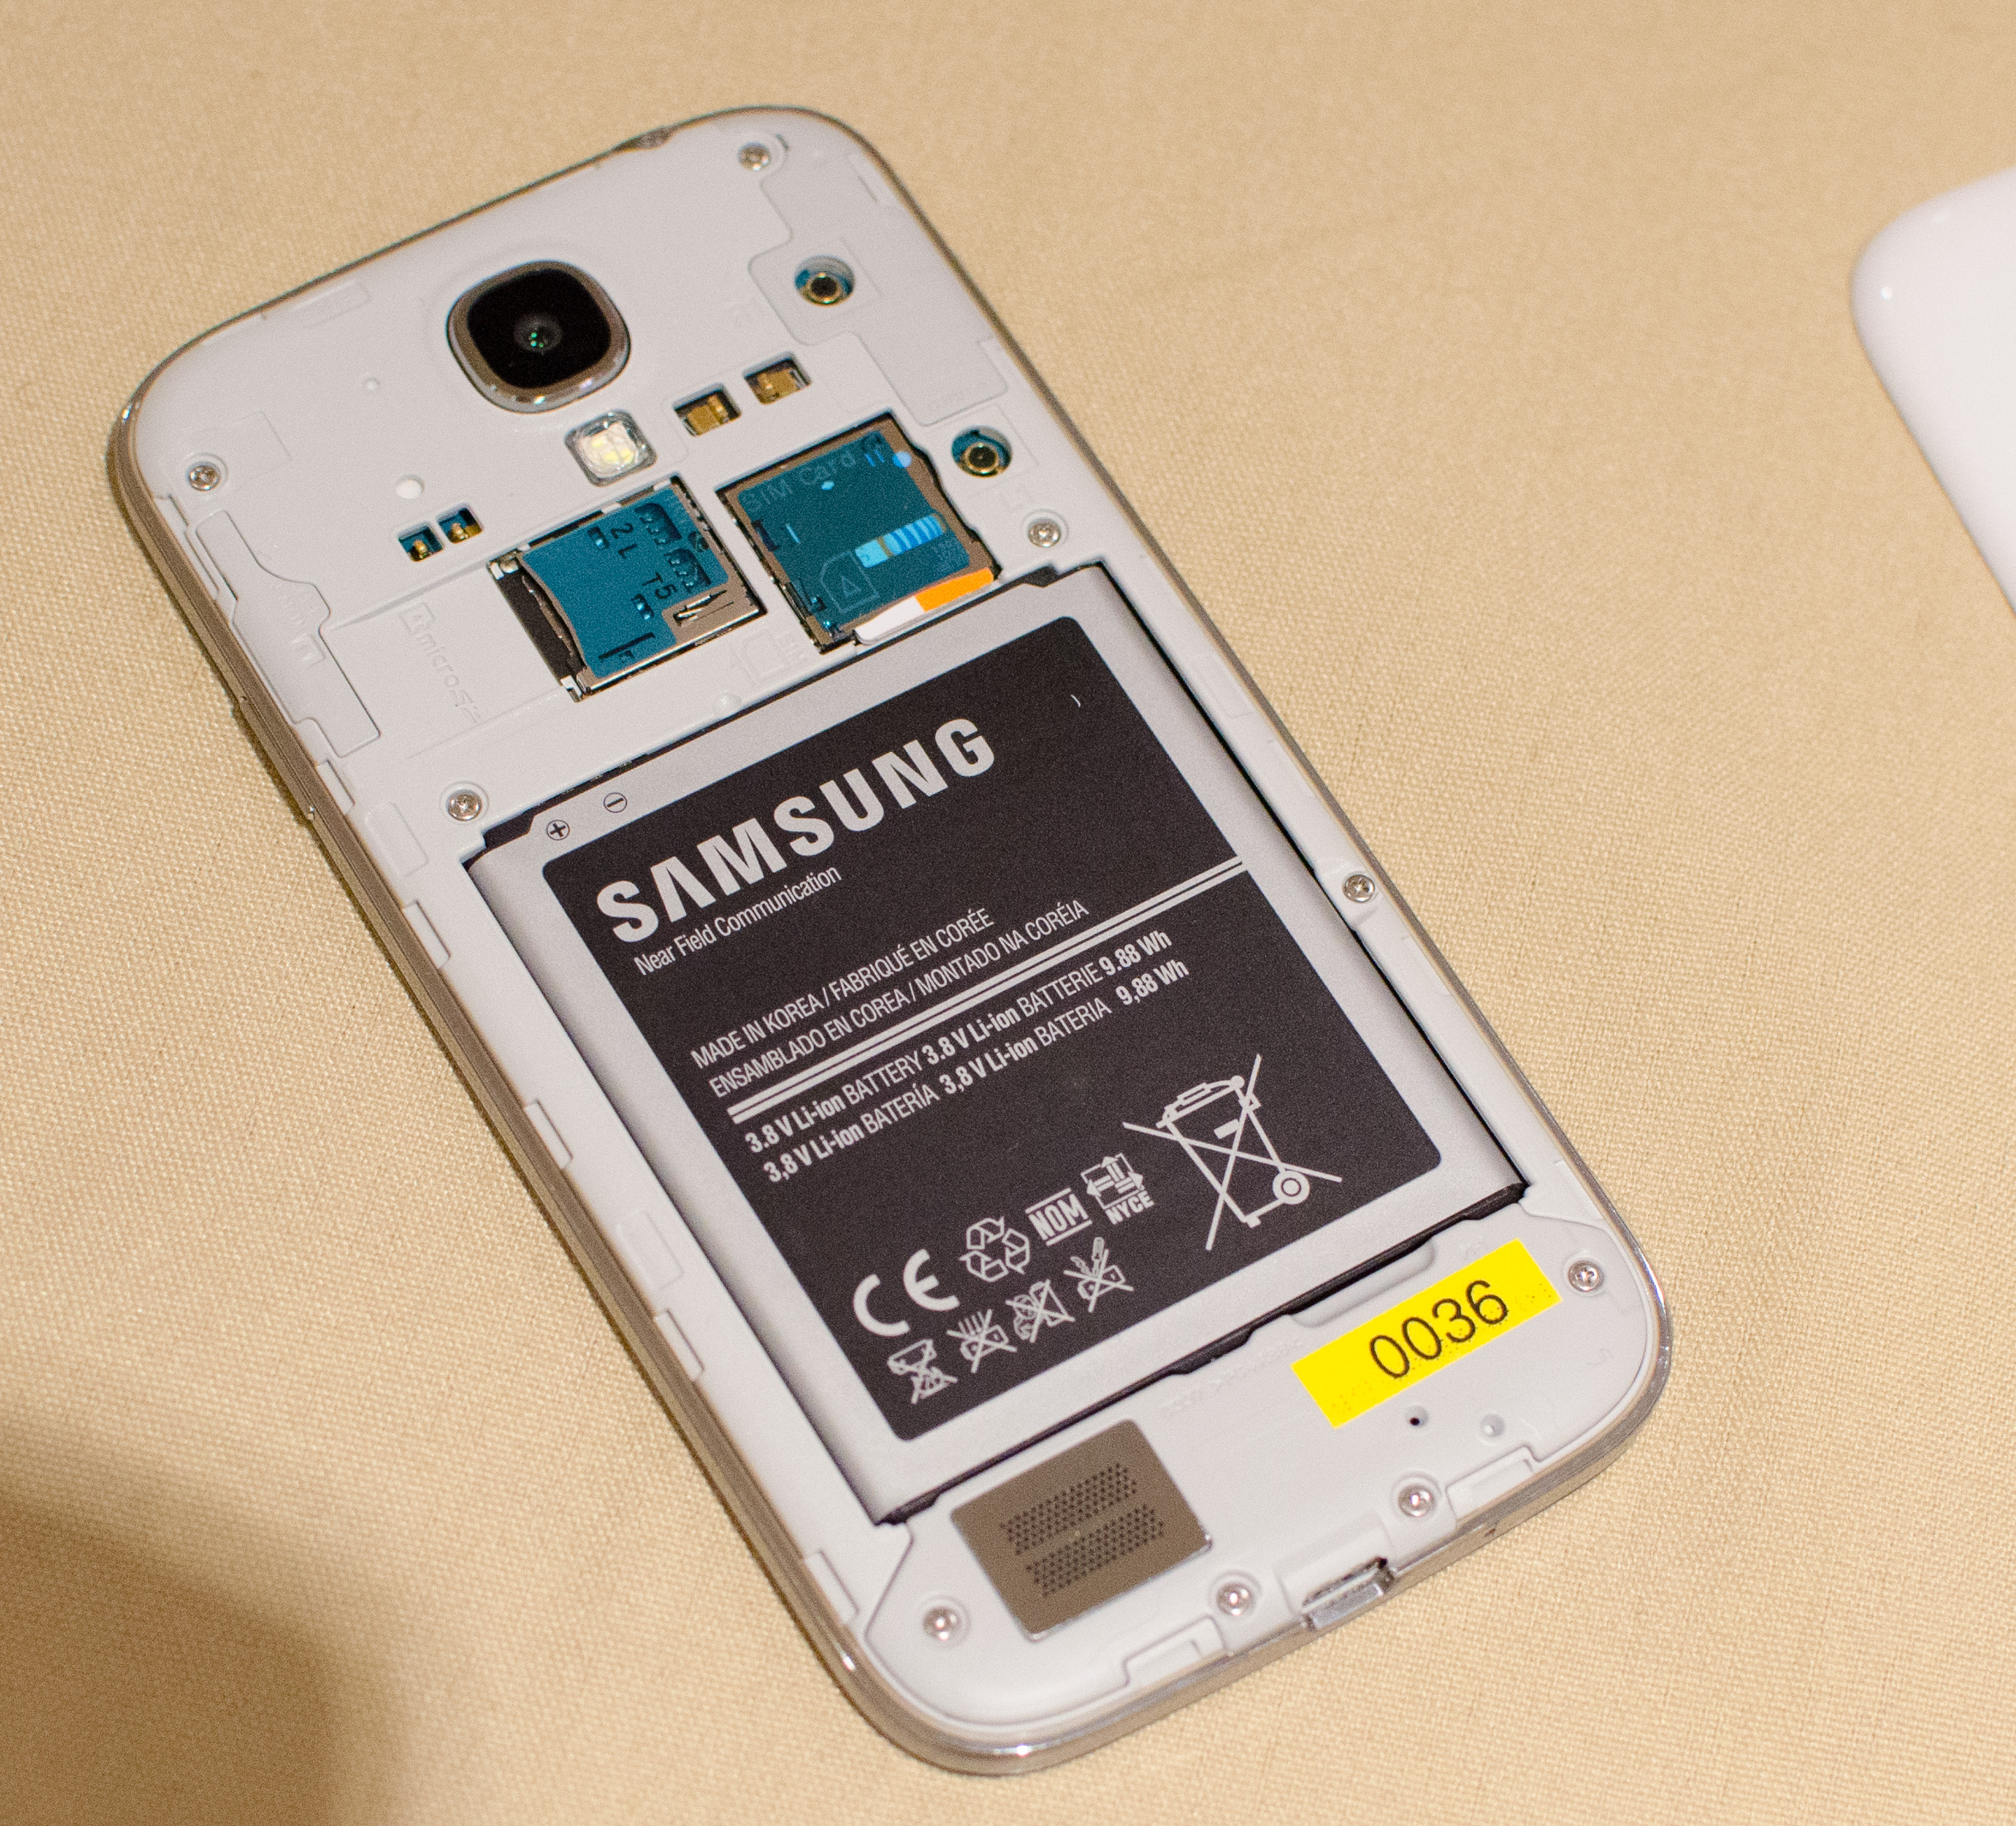 Samsung's Galaxy S 4: Introduction & Hands On